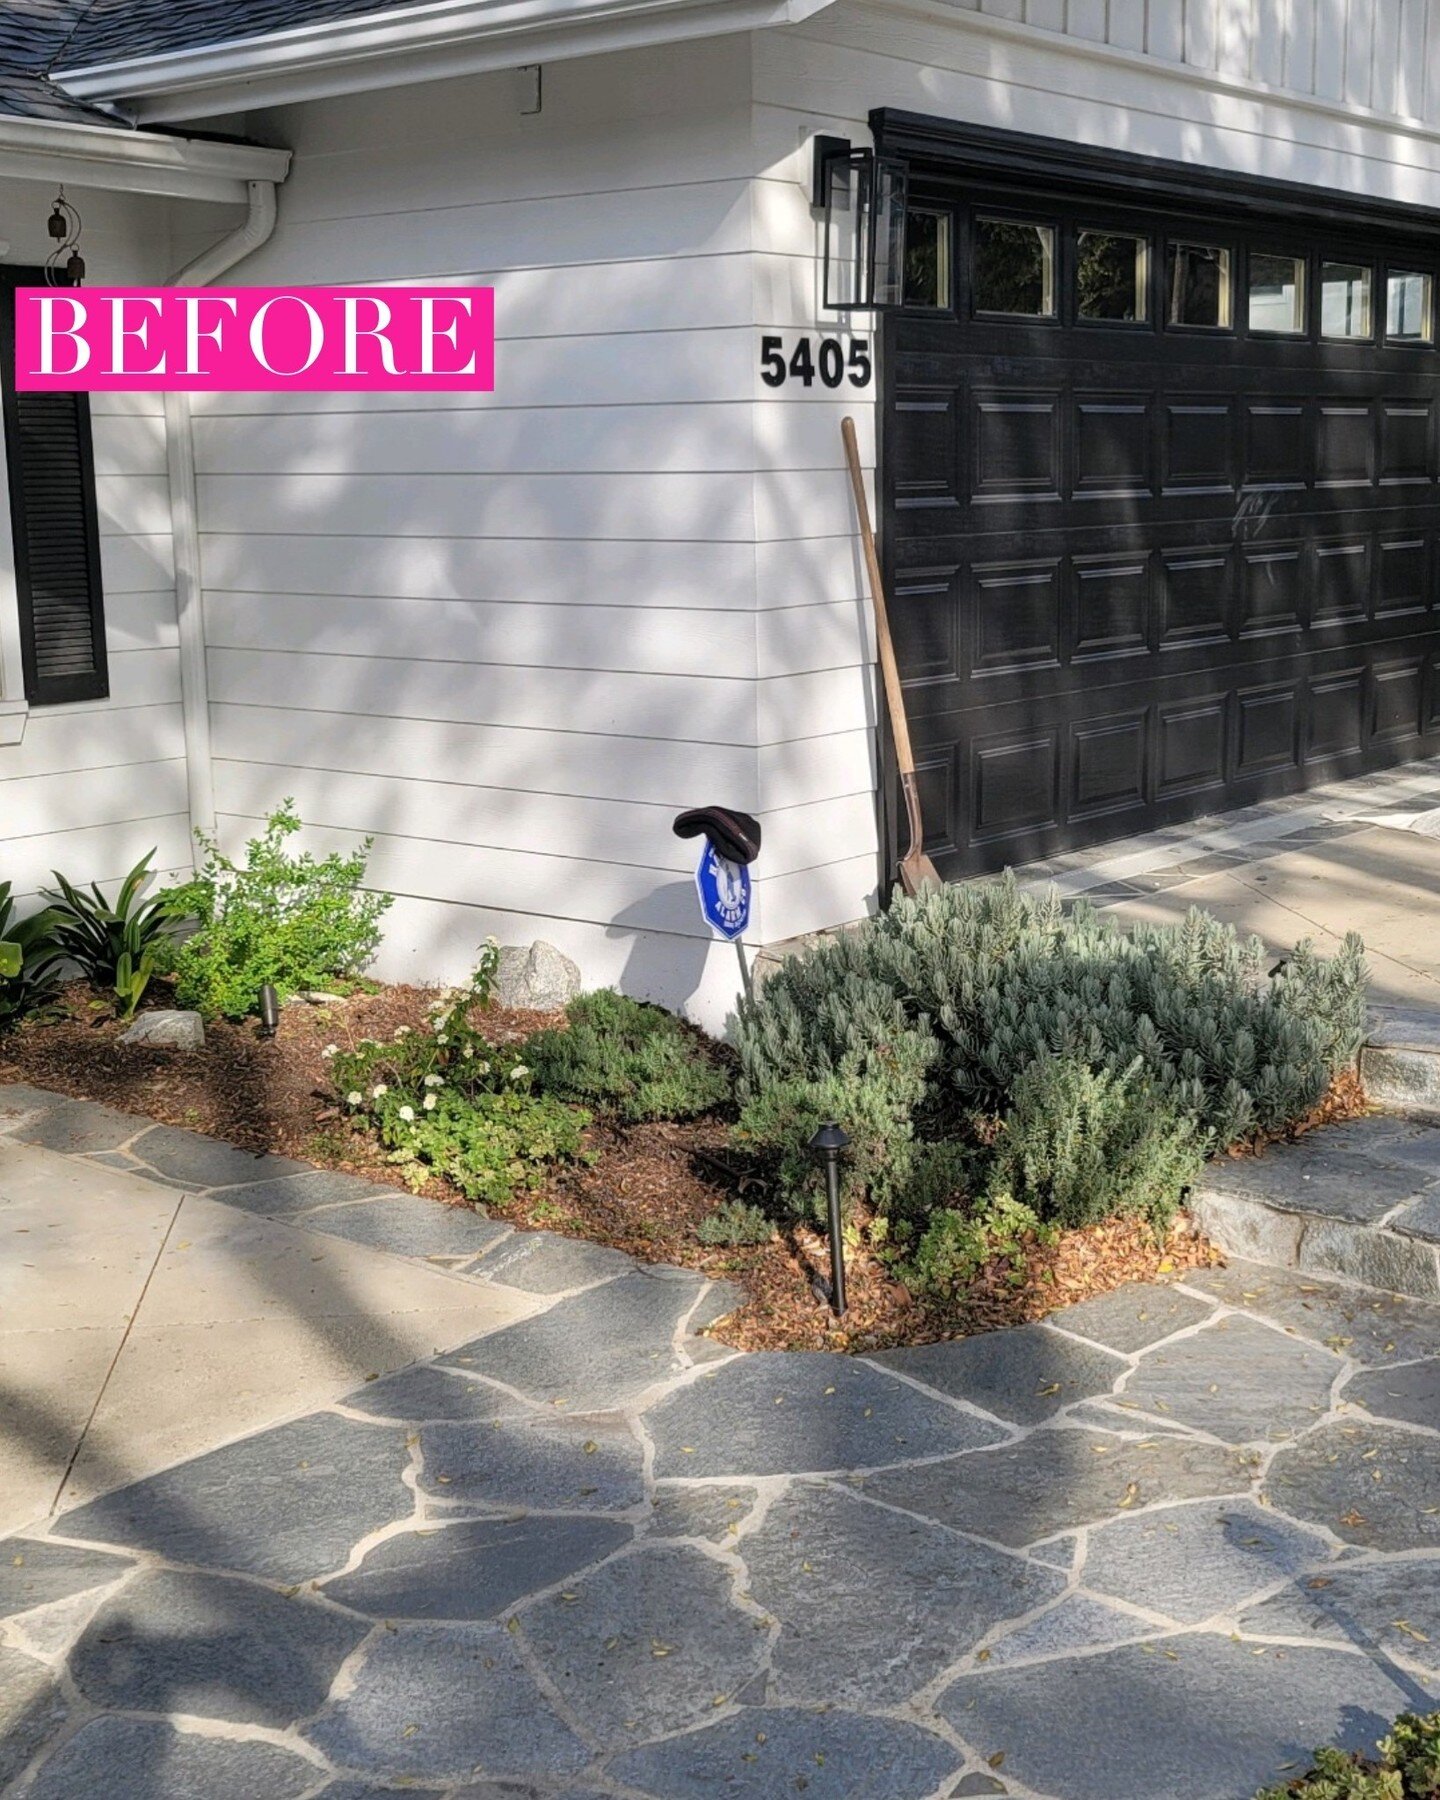 Here are a few more photos of the total redesign &amp; replanting of a front yard in Redondo Beach. 🌿⁠
⁠
We replaced drought-tolerant plants with grass and shade-loving plants, which will do much better than what was originally planted. Even though 